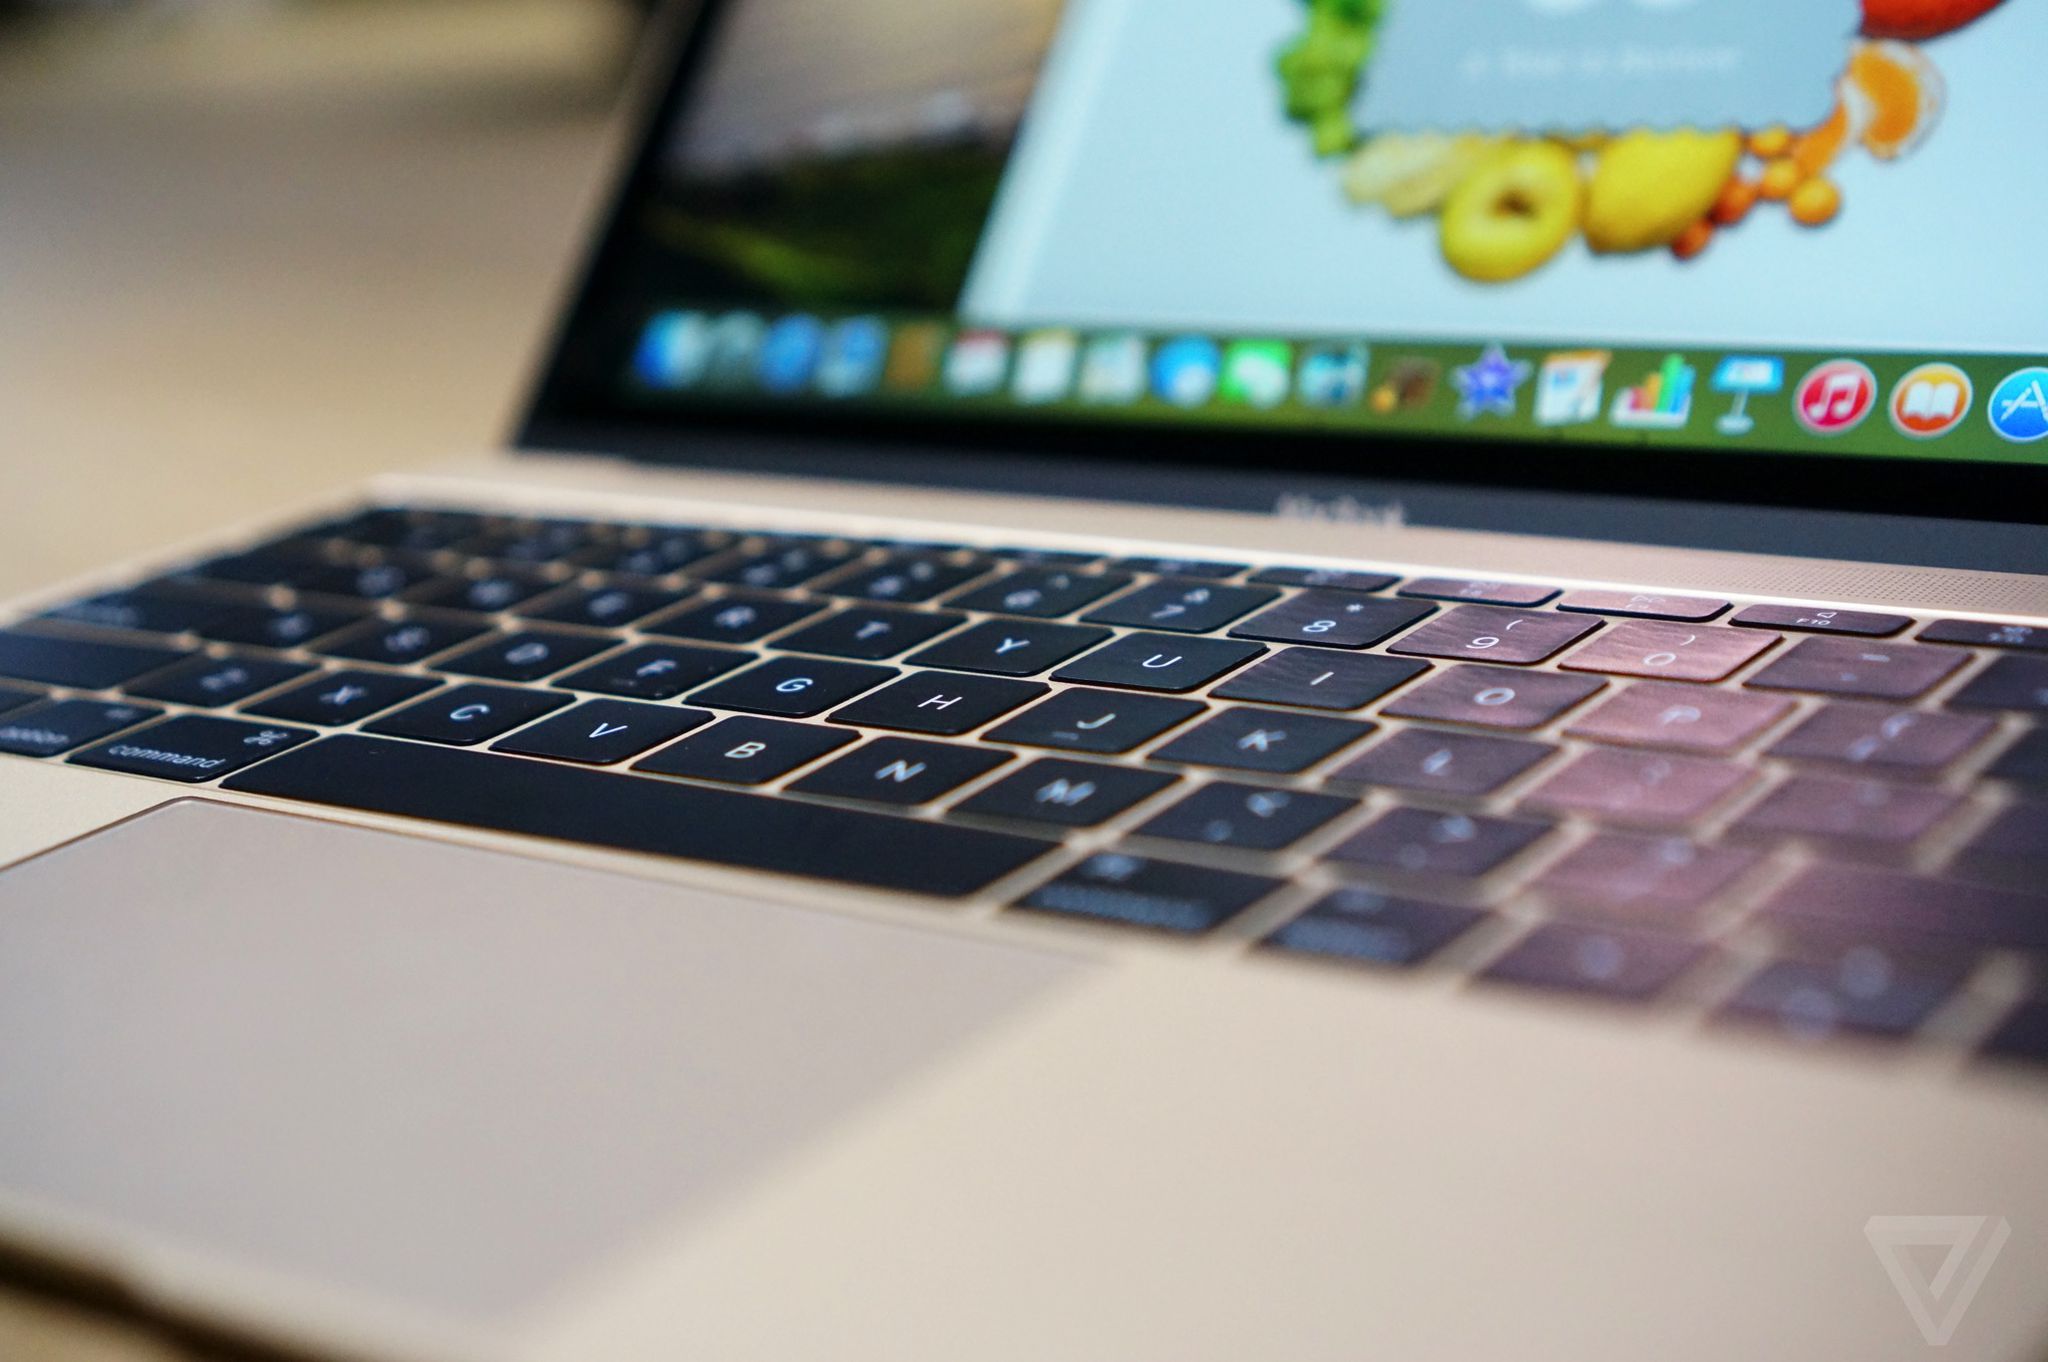 Hands-on with the new 12-inch MacBook with Retina Display - The Verge